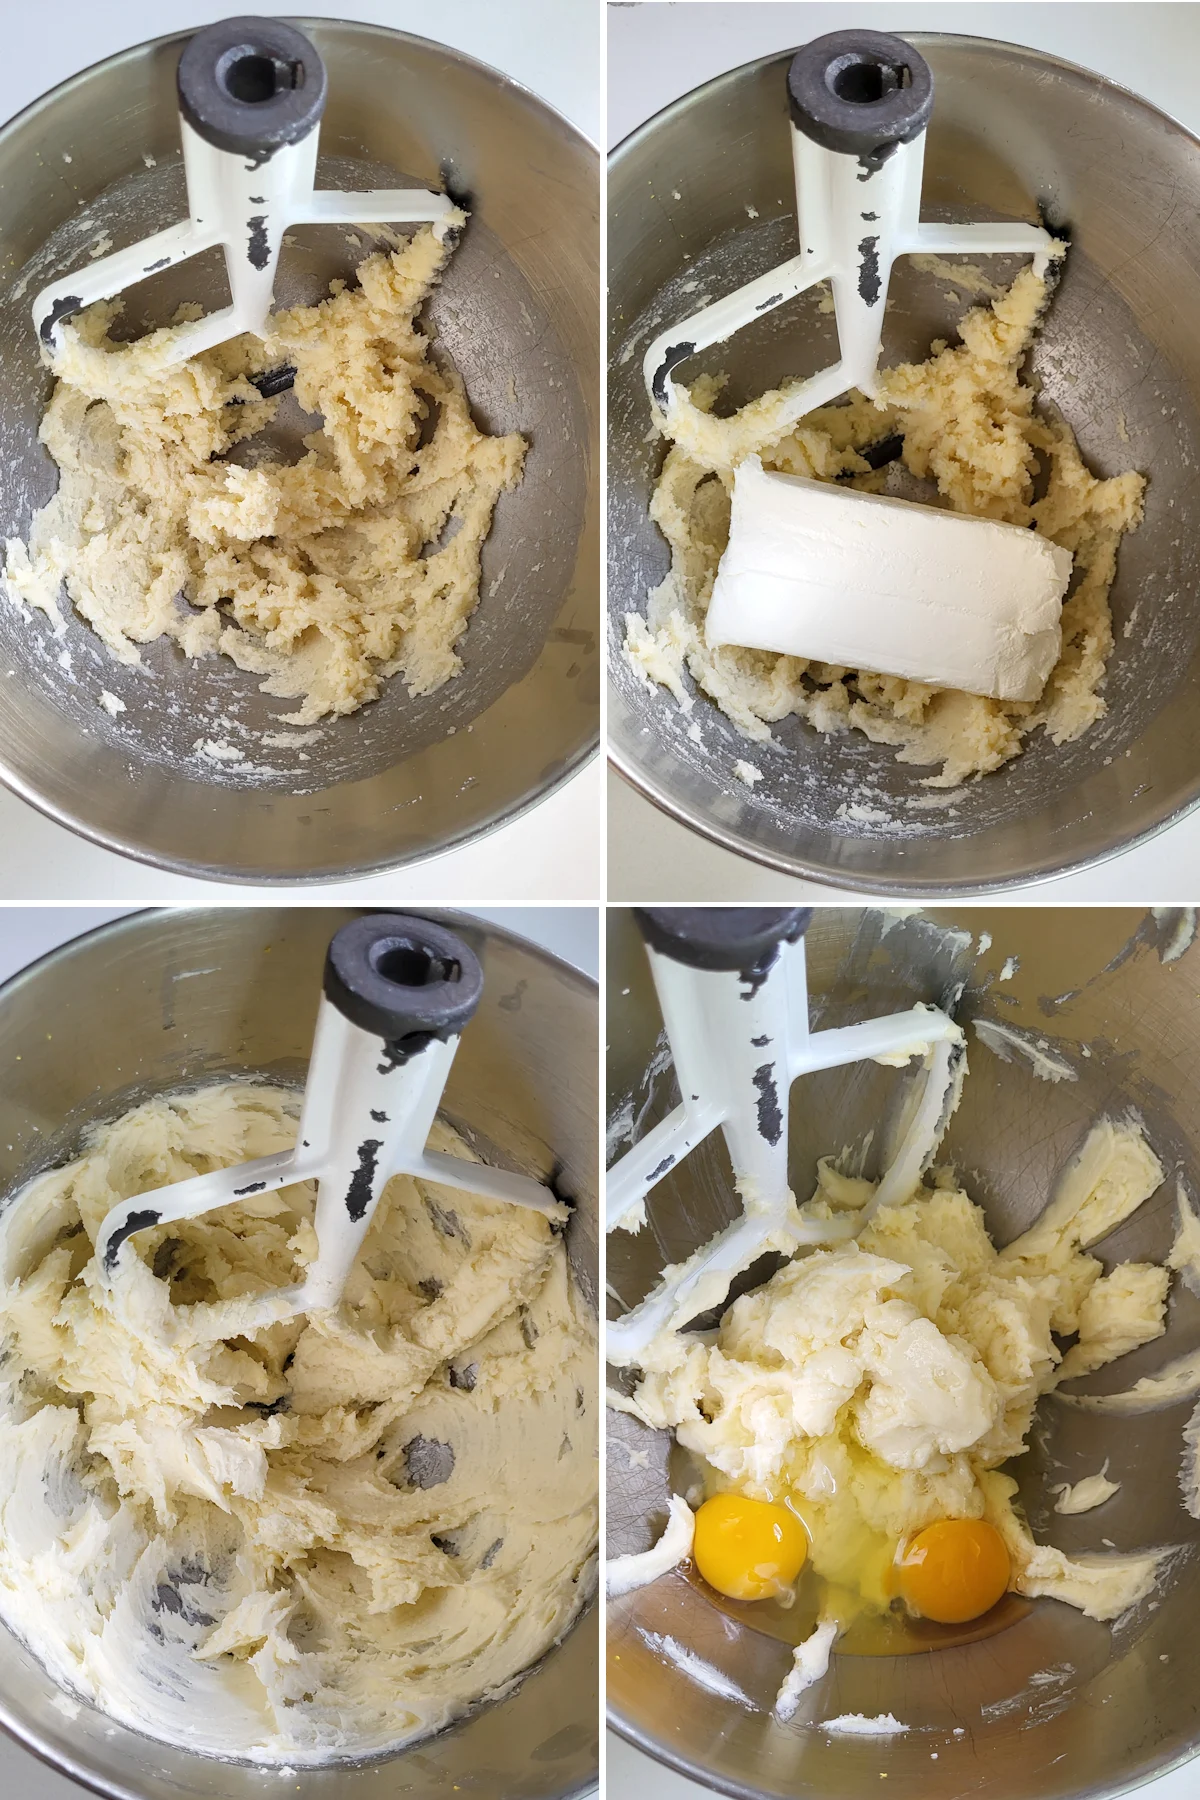 1. Butter and sugar in a mixing bowl. 2. Cream cheese added to the bowl. 3. Cream cheese mixed into the batter. 4. Two eggs added to the batter. 